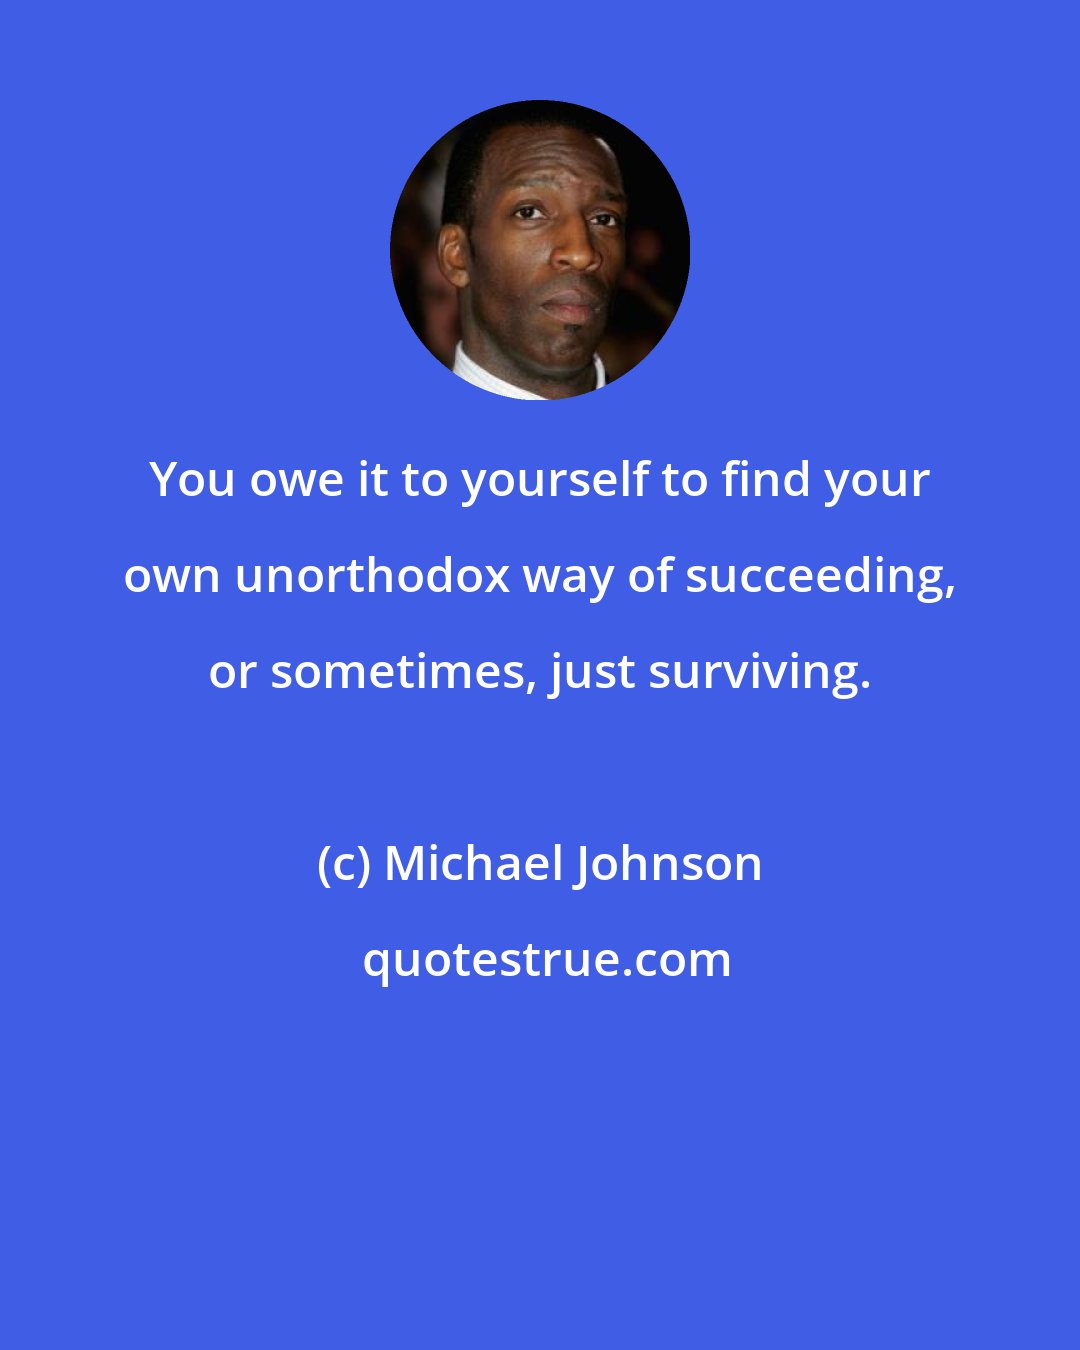 Michael Johnson: You owe it to yourself to find your own unorthodox way of succeeding, or sometimes, just surviving.